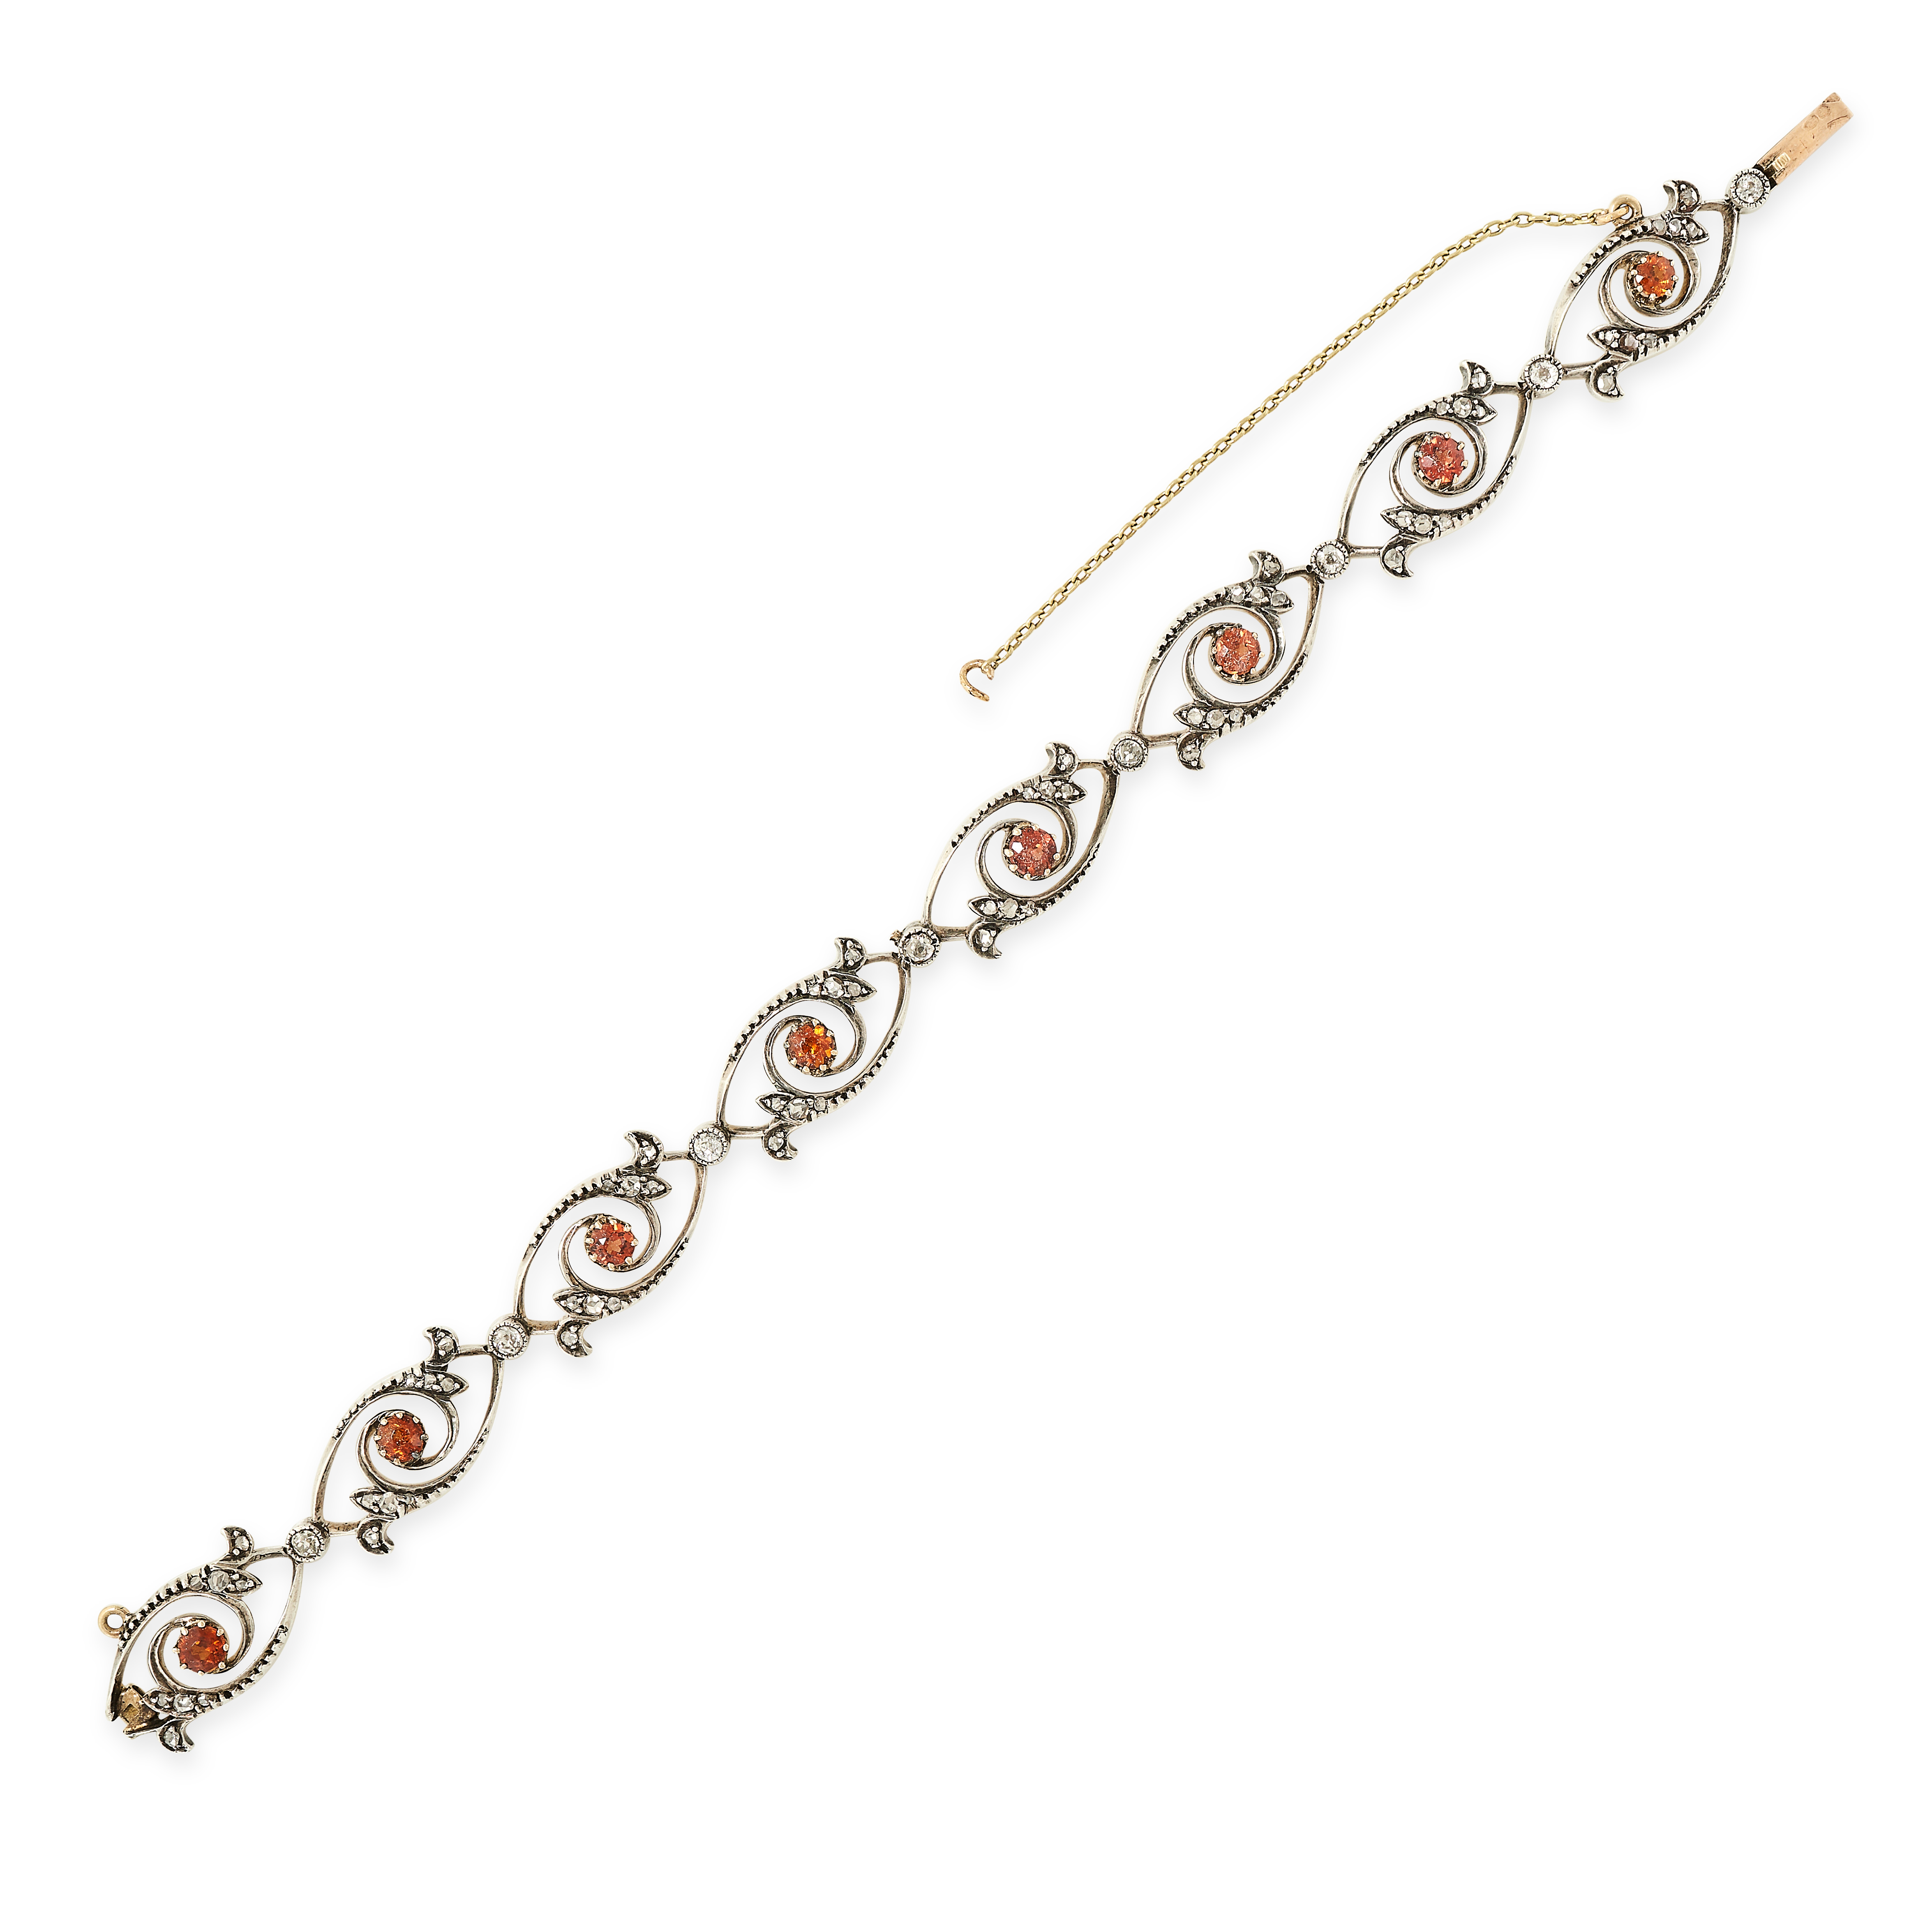 AN ANTIQUE DIAMOND AND BROWN ZIRCON BRACELET in 18ct yellow gold and silver, comprising eight